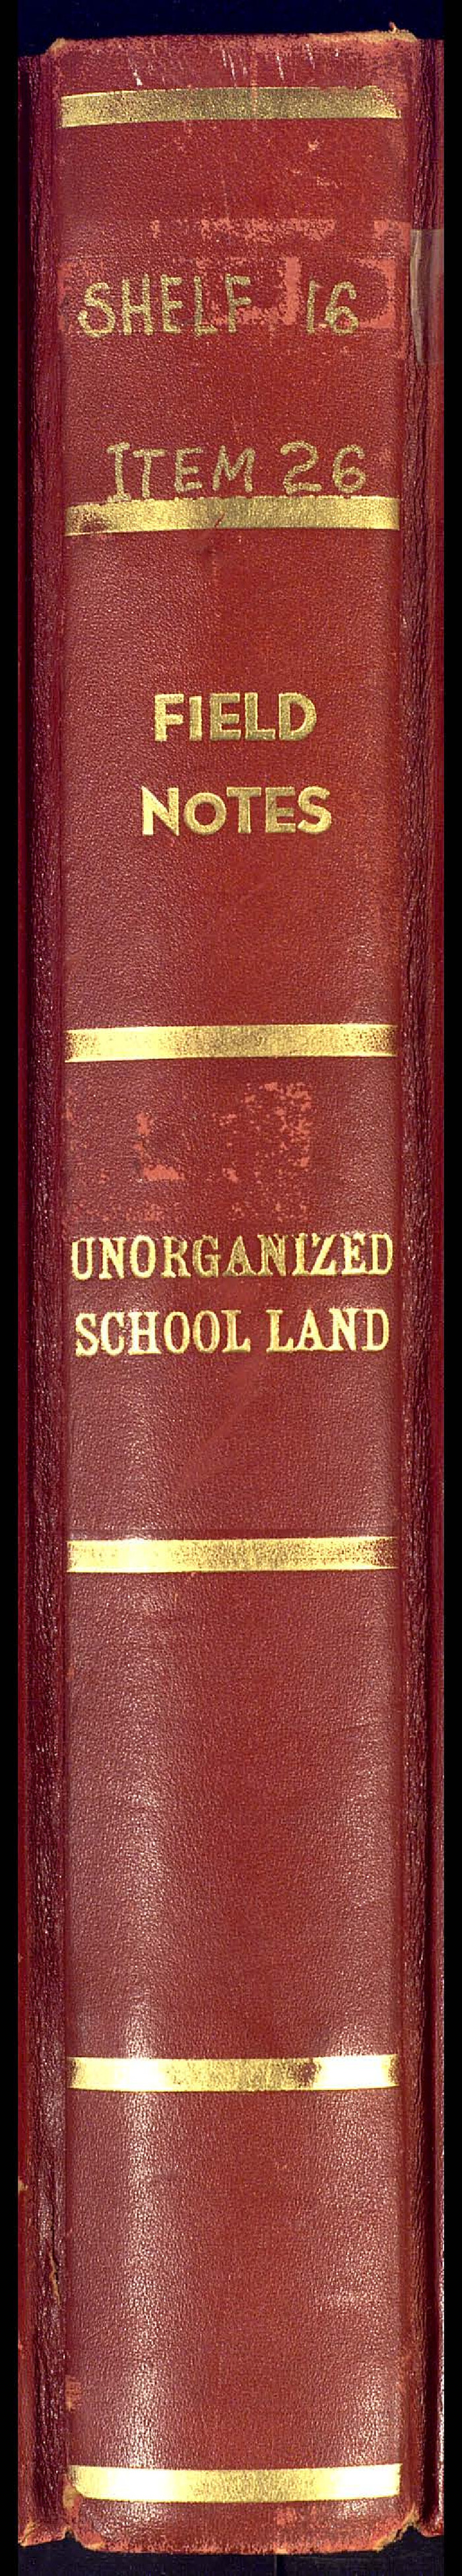 81708, Field Notes, Unorganized School Land, General Map Collection